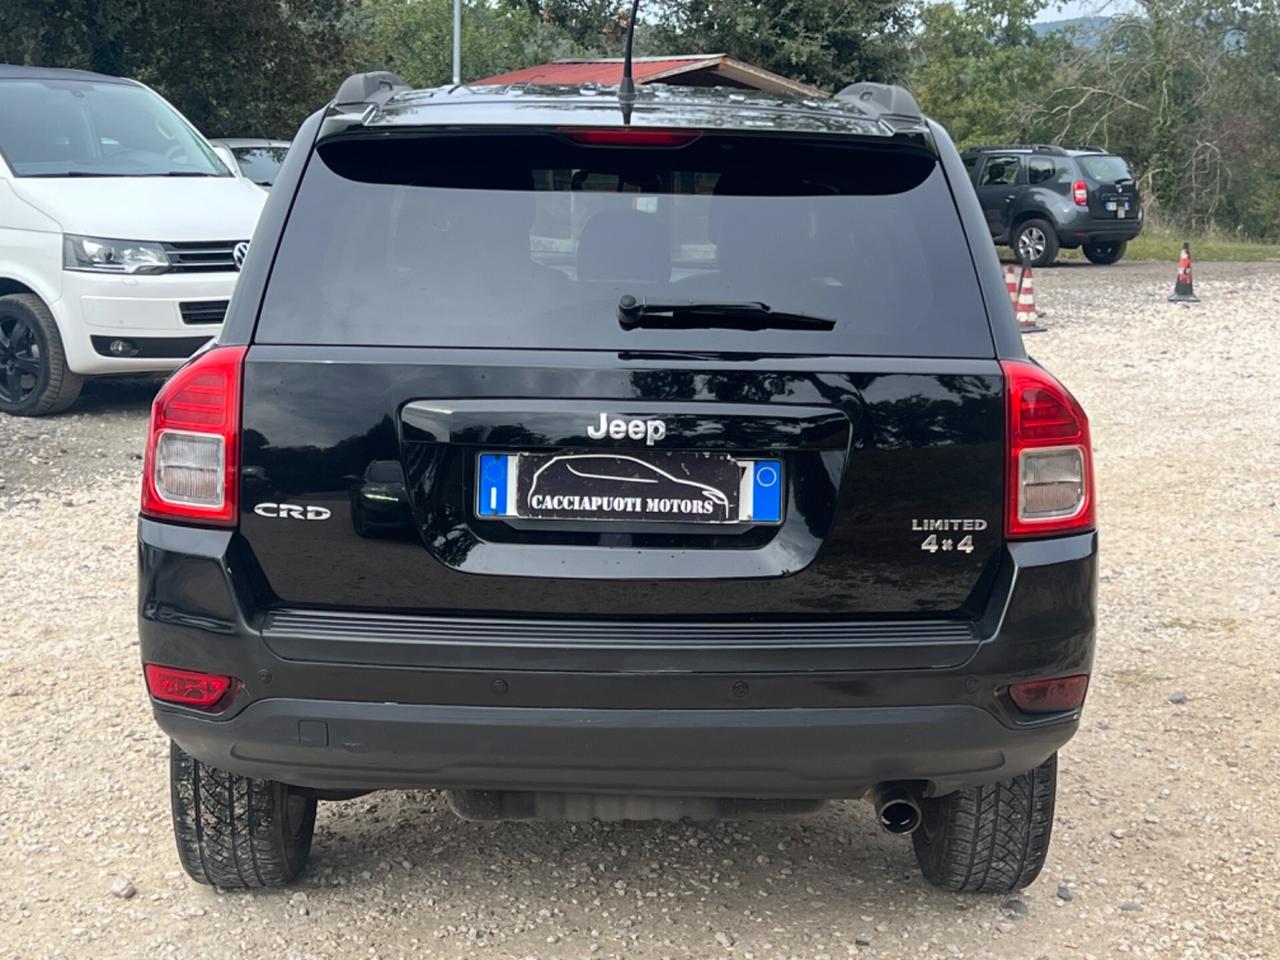 Jeep Compass 2.2 CRD Limited 4WD